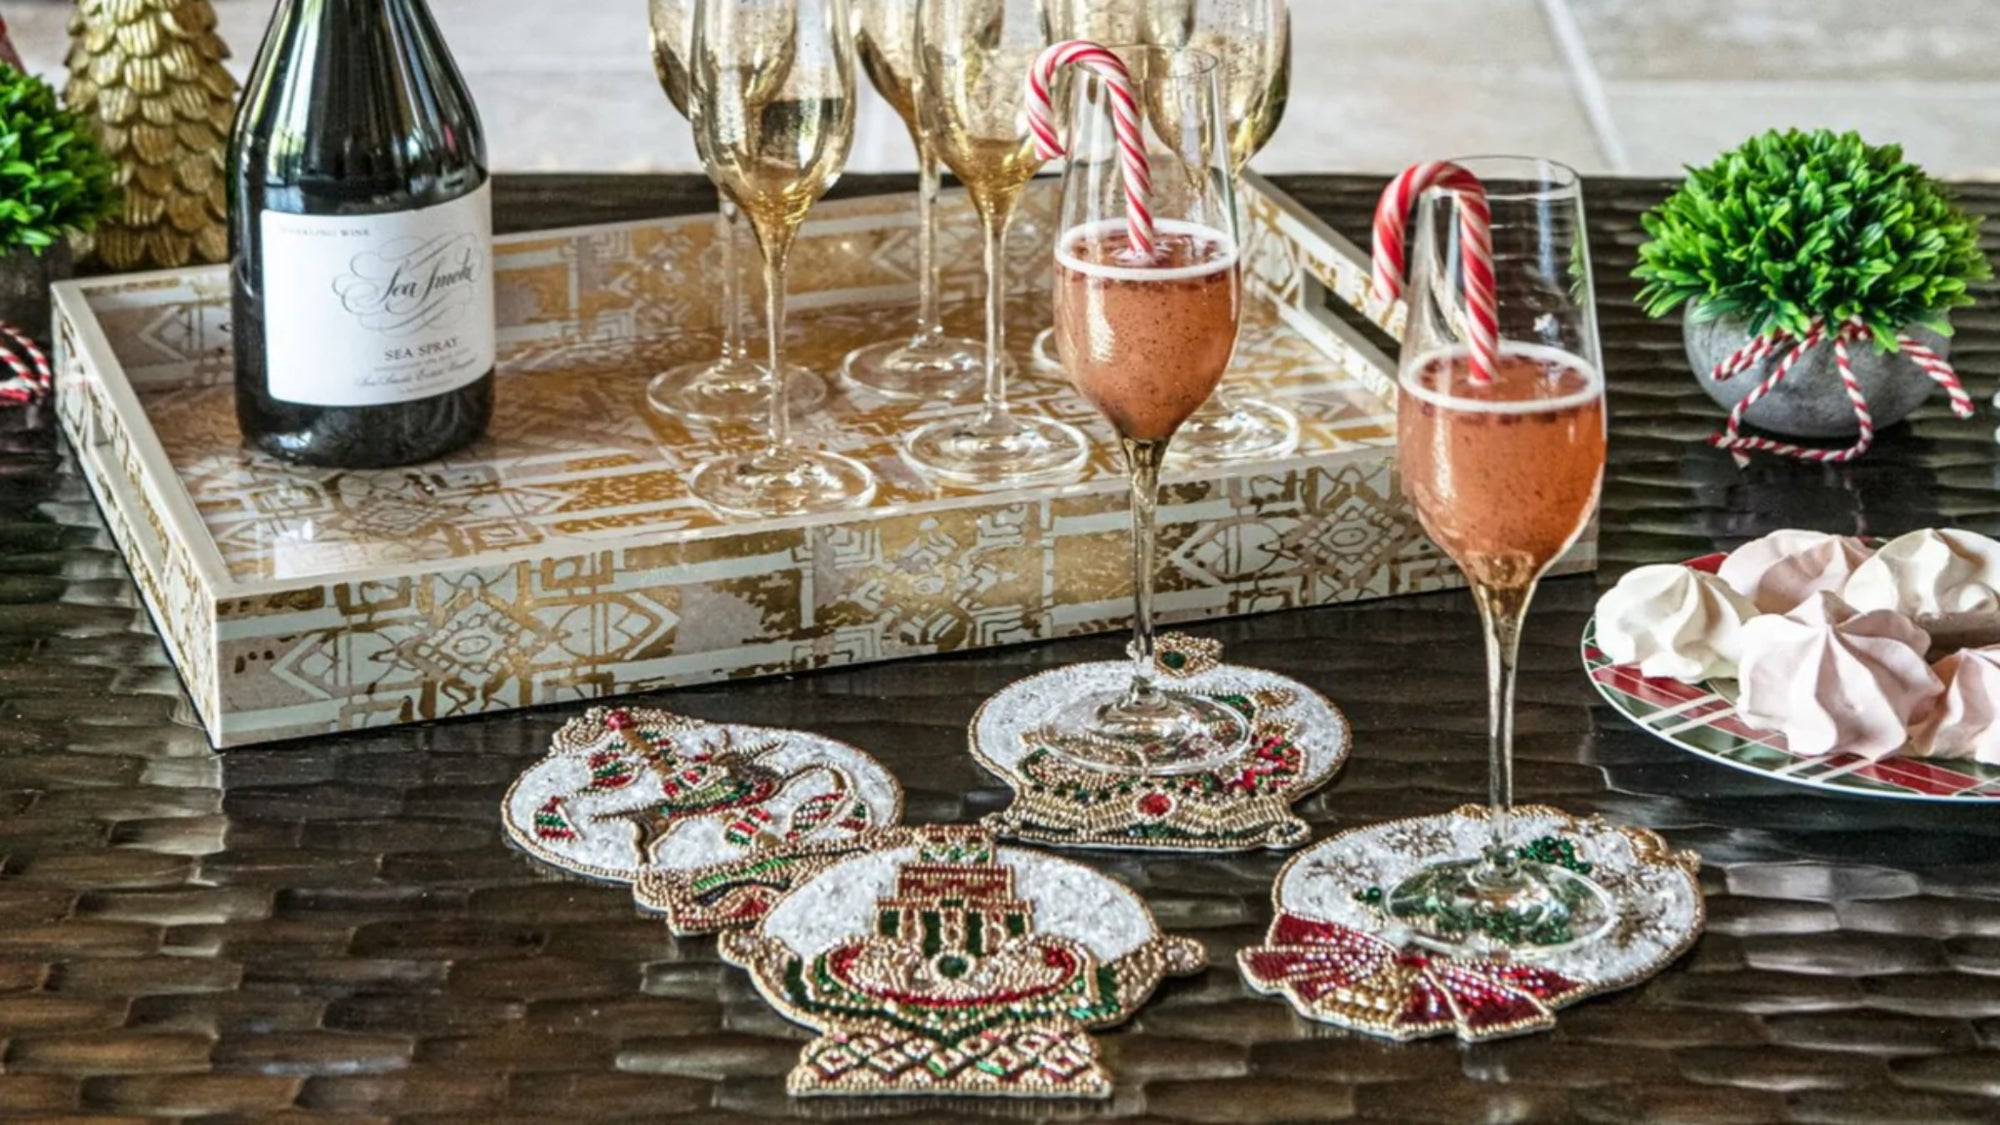 Wines glasses on Christmas styled coasters